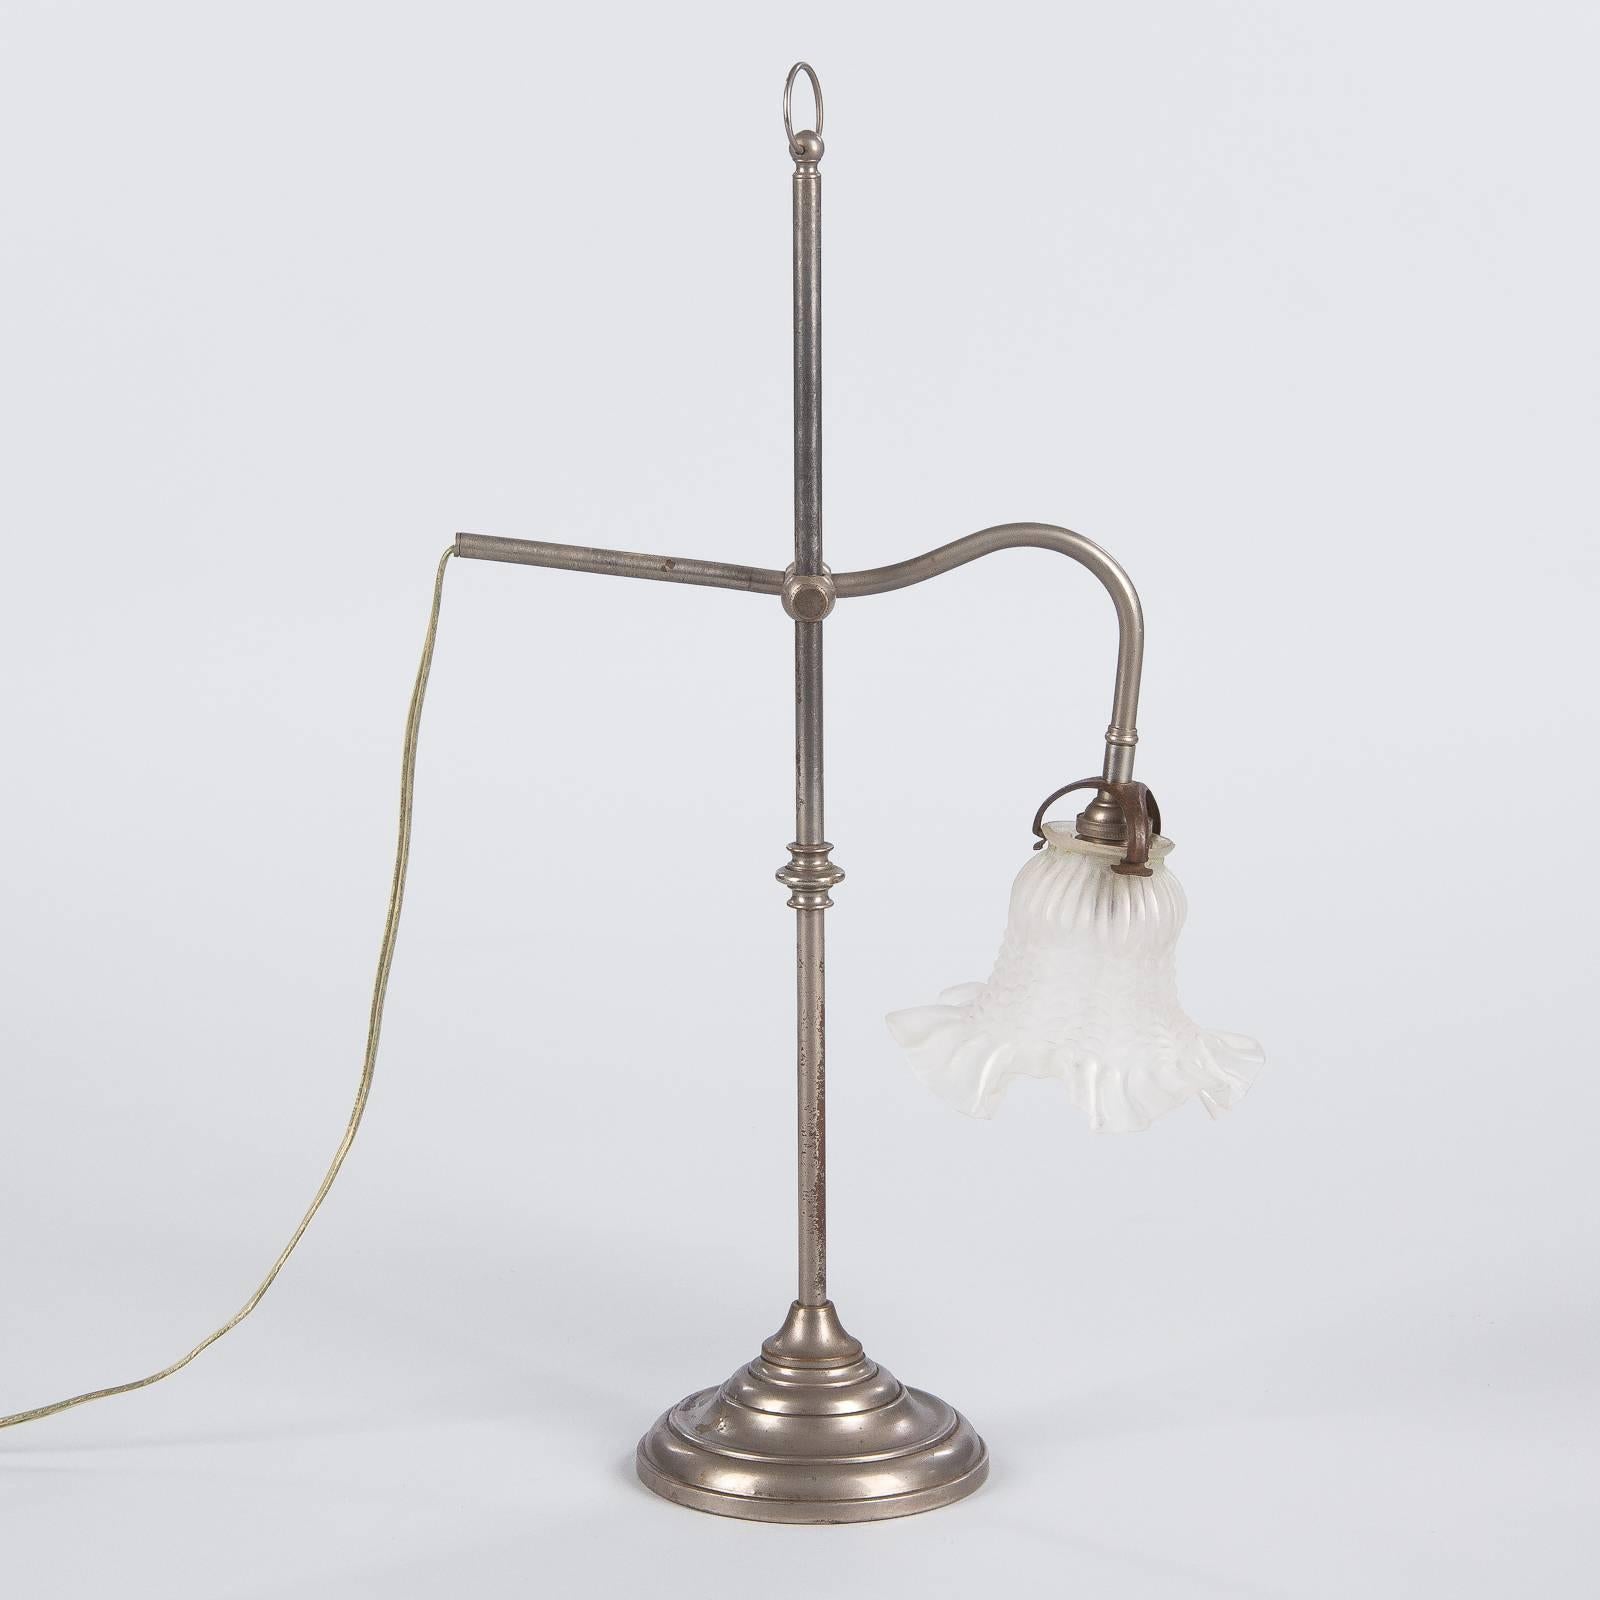 French Art Deco Silver Metal Desk Lamp with Glass Shade, 1930s 2